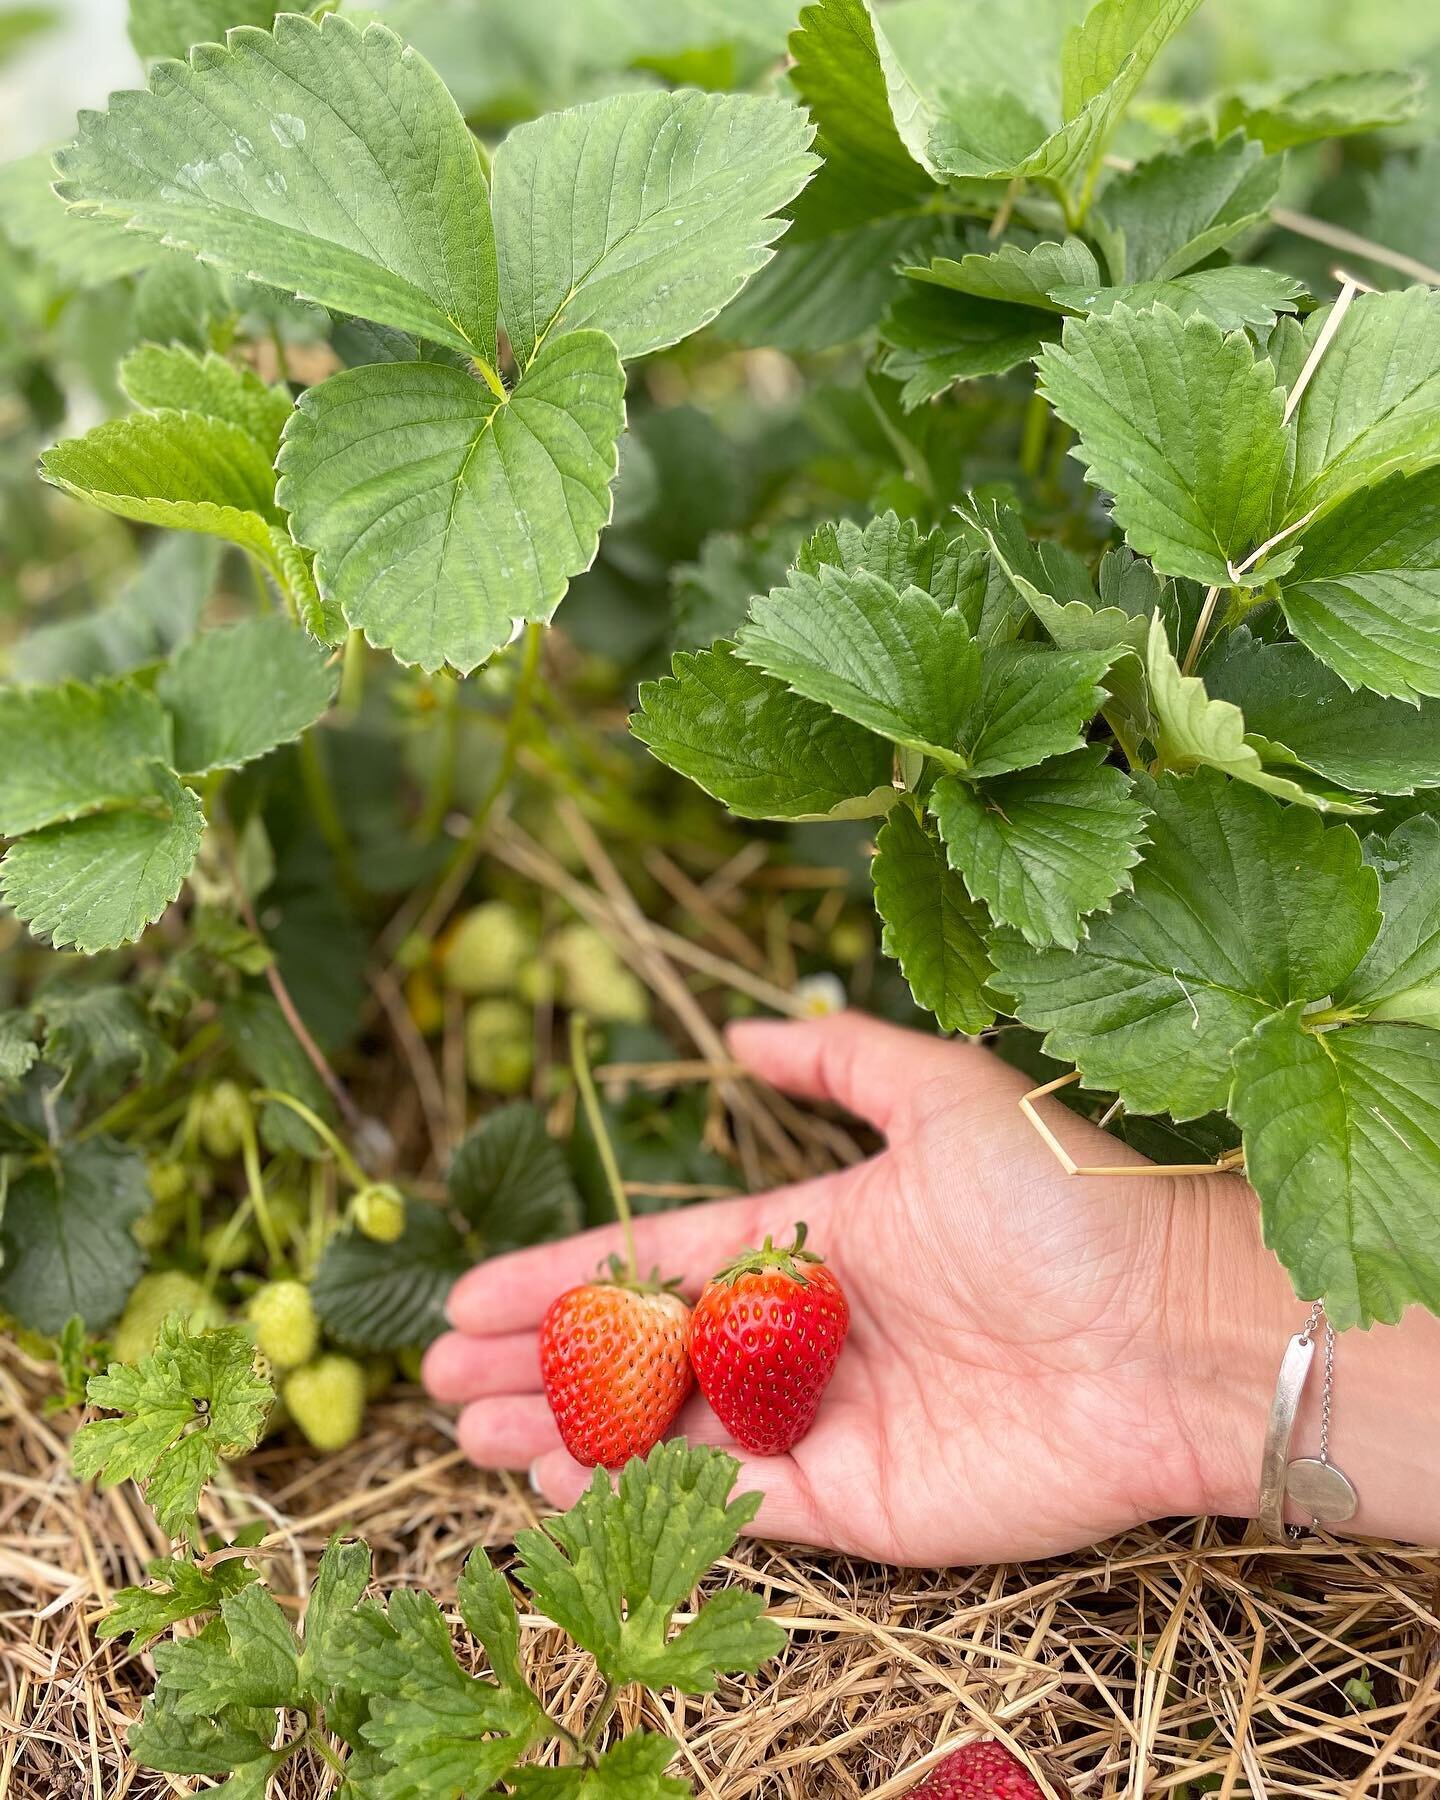 🍓 First strawberries of the season! We went hunting in the polytunnel after school and discovered we&rsquo;re set for a bumper crop this year 🍓